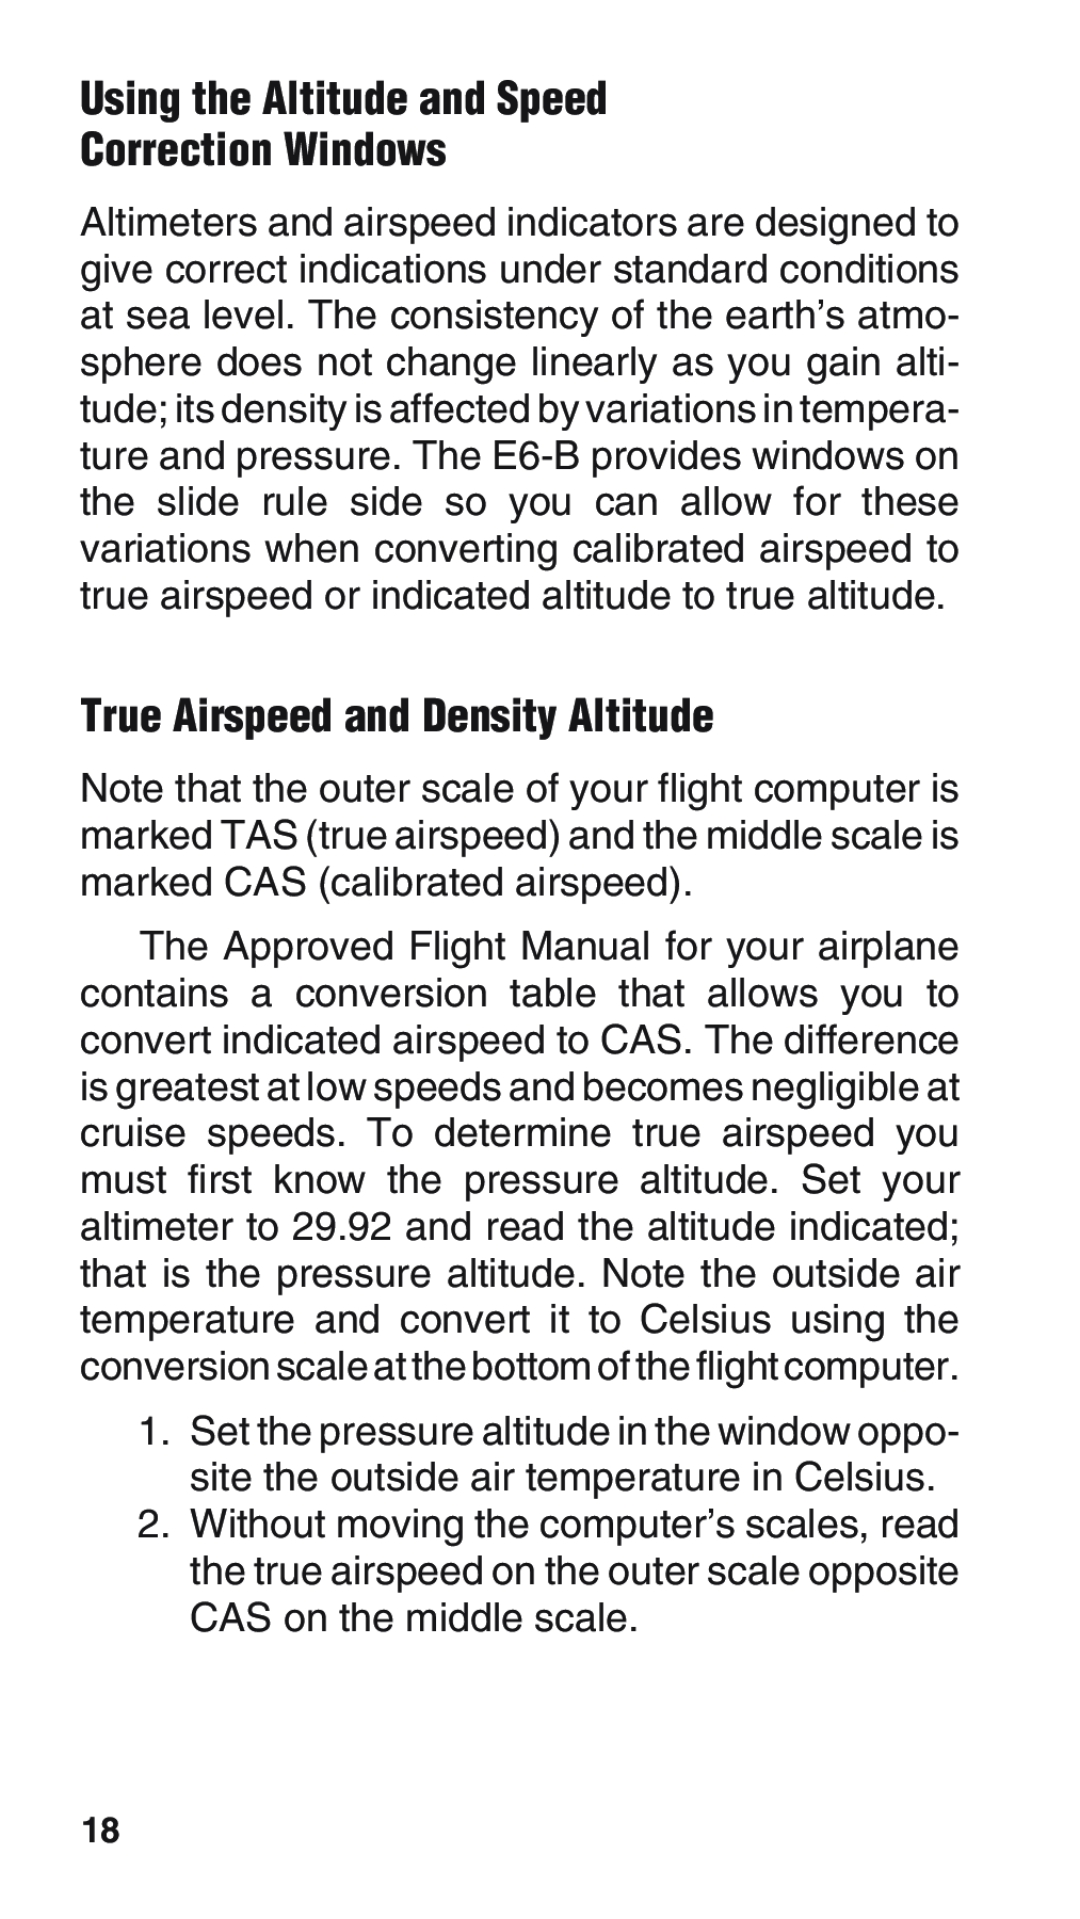 ASA Electronics E6-B manual Using the Altitude and Speed Correction Windows, True Airspeed and Density Altitude 